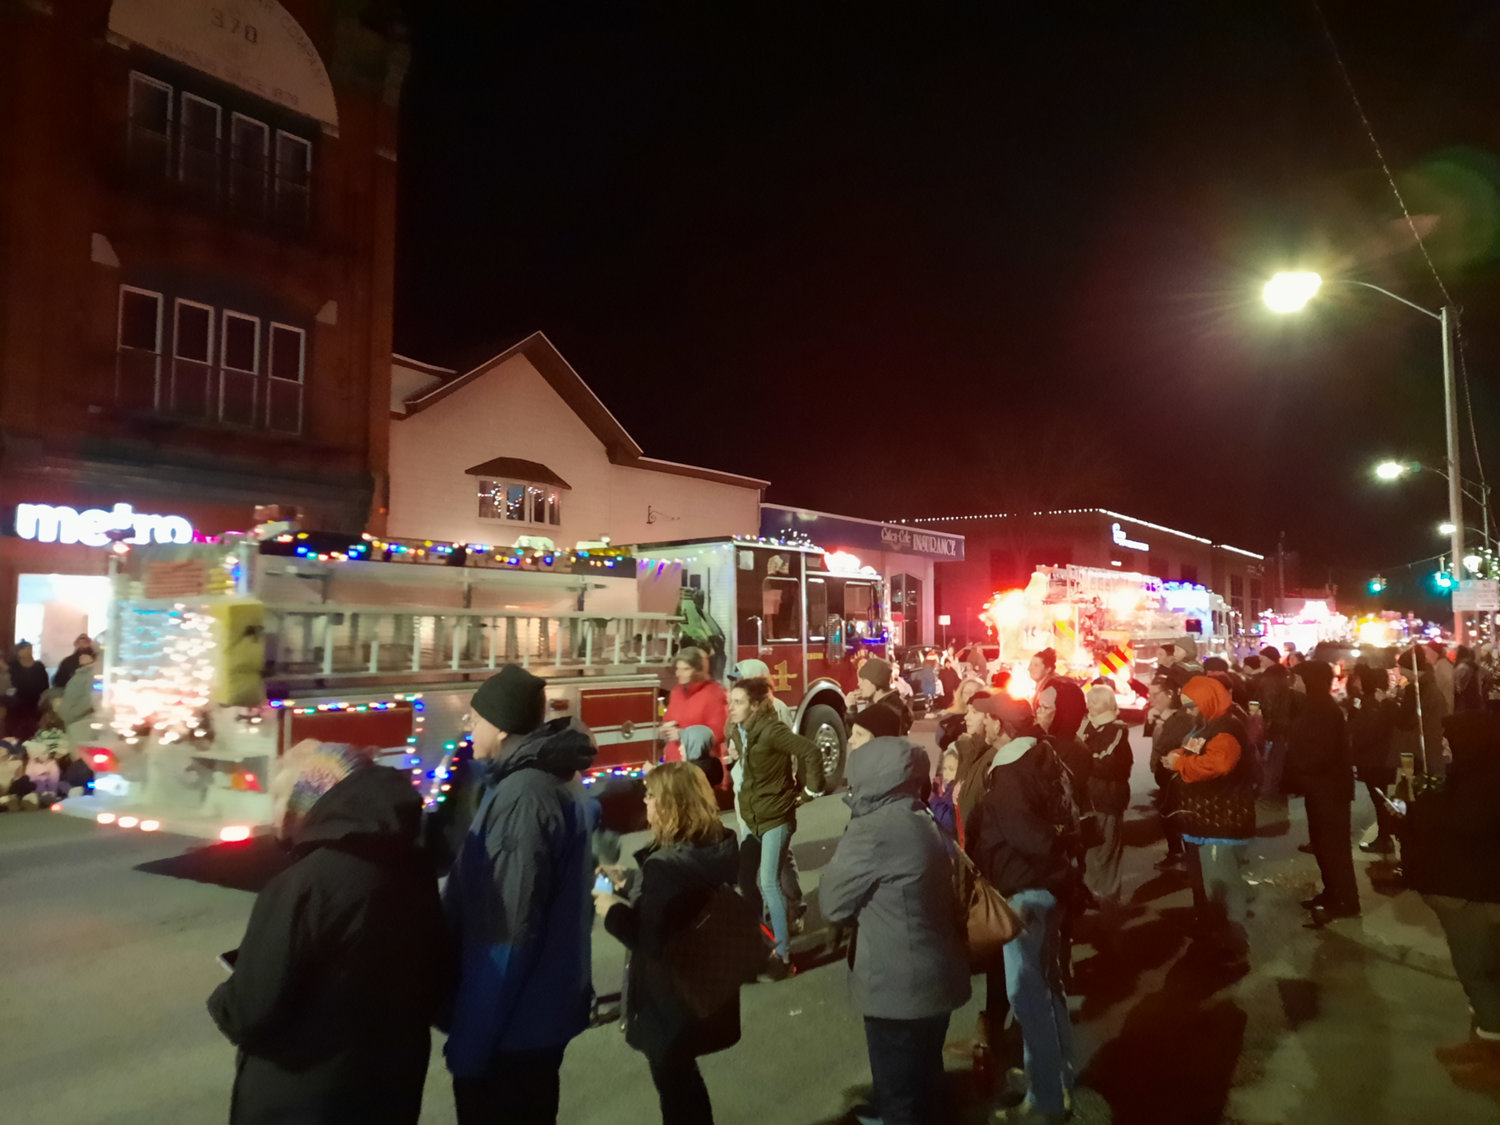 The city of Oneida welcomed in the holiday season with its second annual Parade of Lights, annual tree lighting, and a visit from Santa Claus.